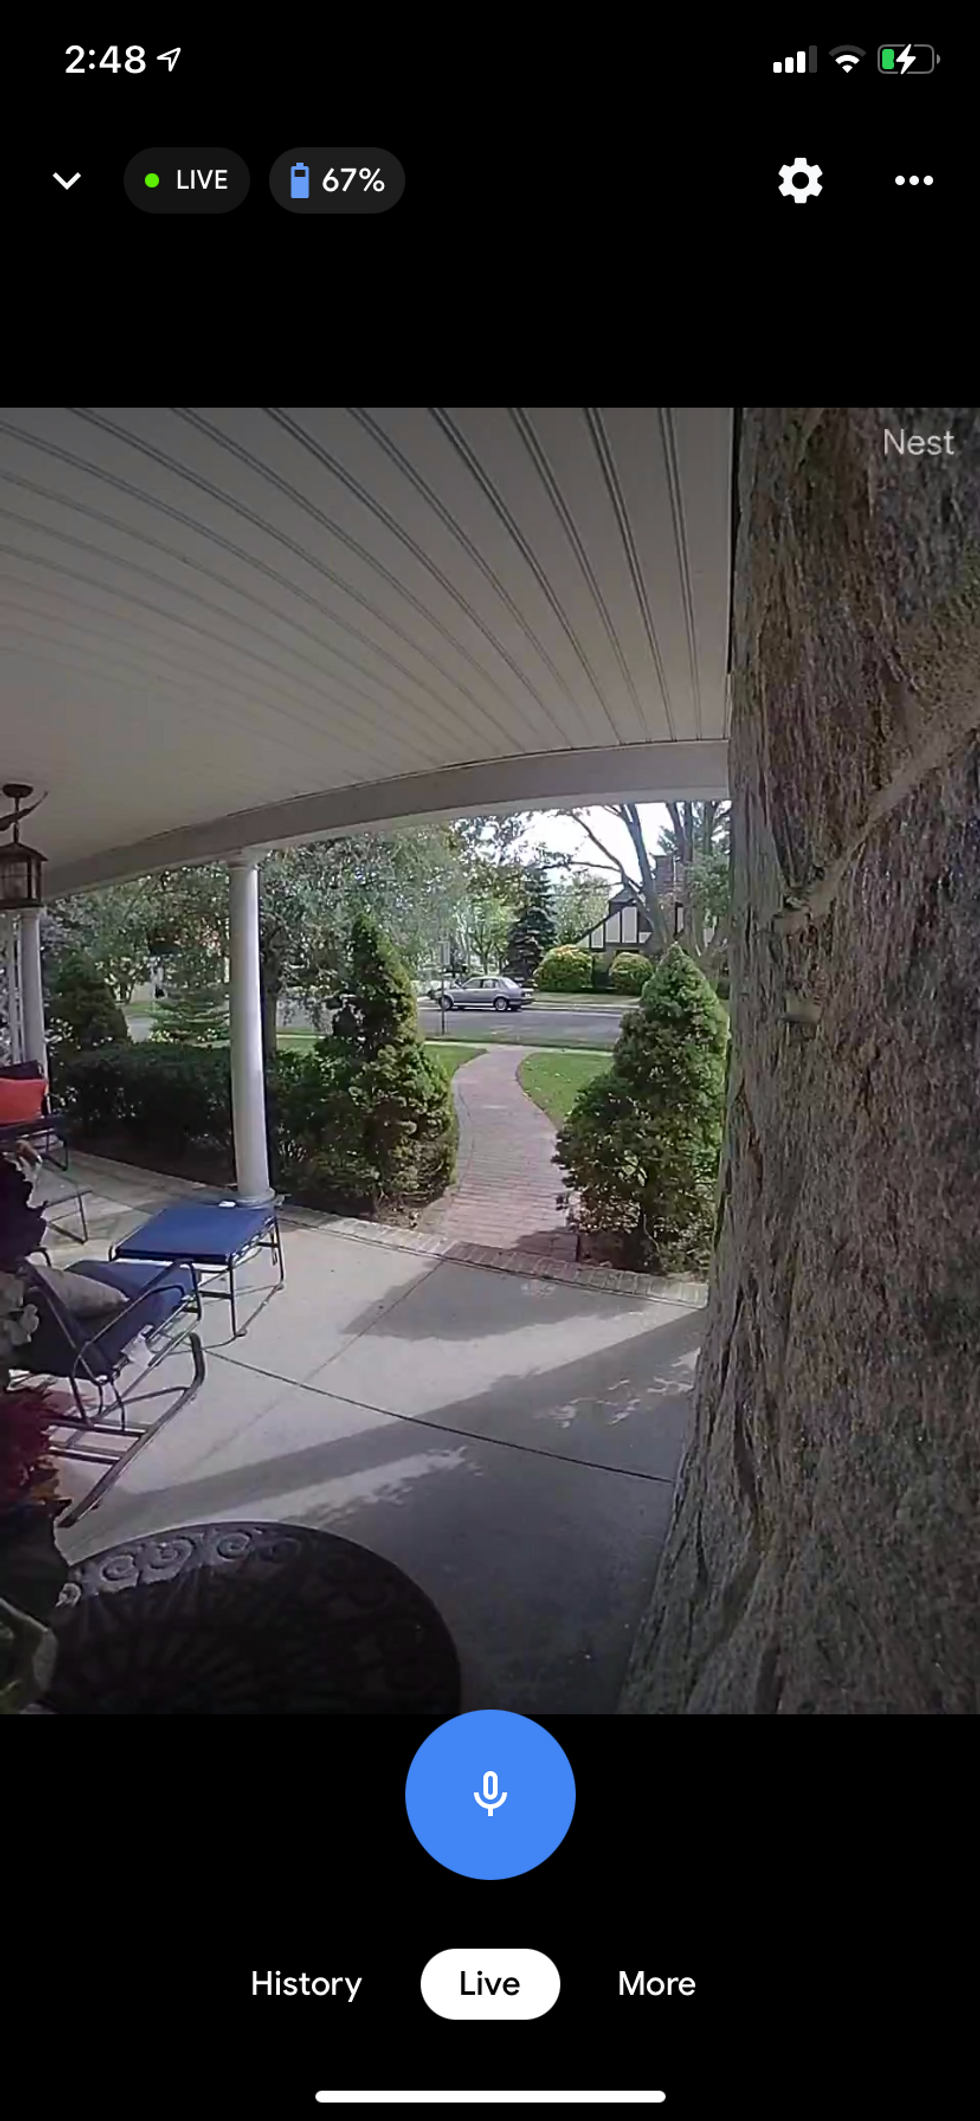 Day time view from Nest doorbell in app